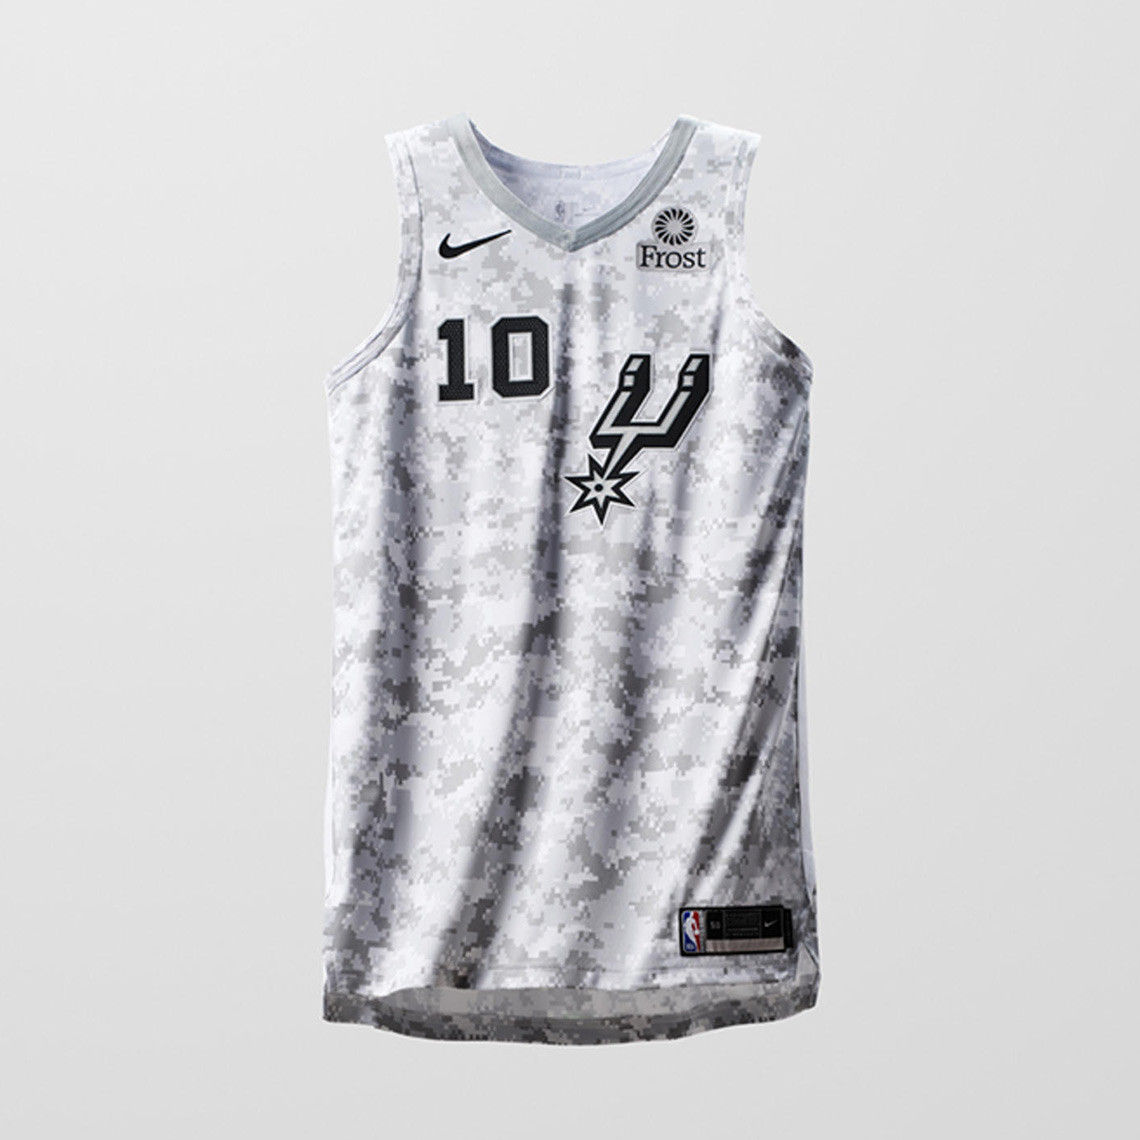 Timberwolves Unveil Nike NBA Earned Edition Uniforms